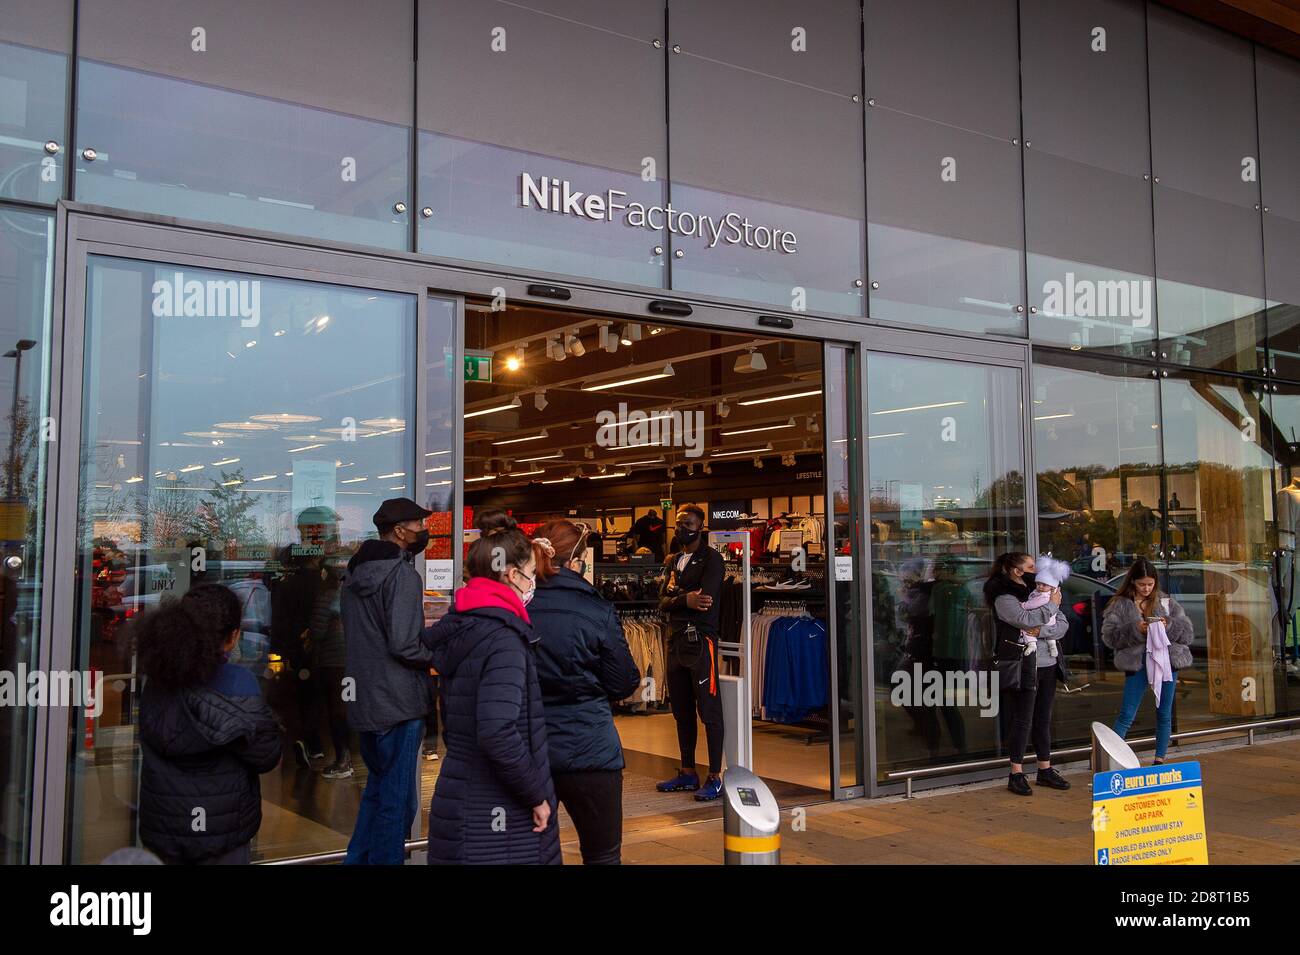 Nike Factory Shop High Resolution Stock Photography and Images - Alamy